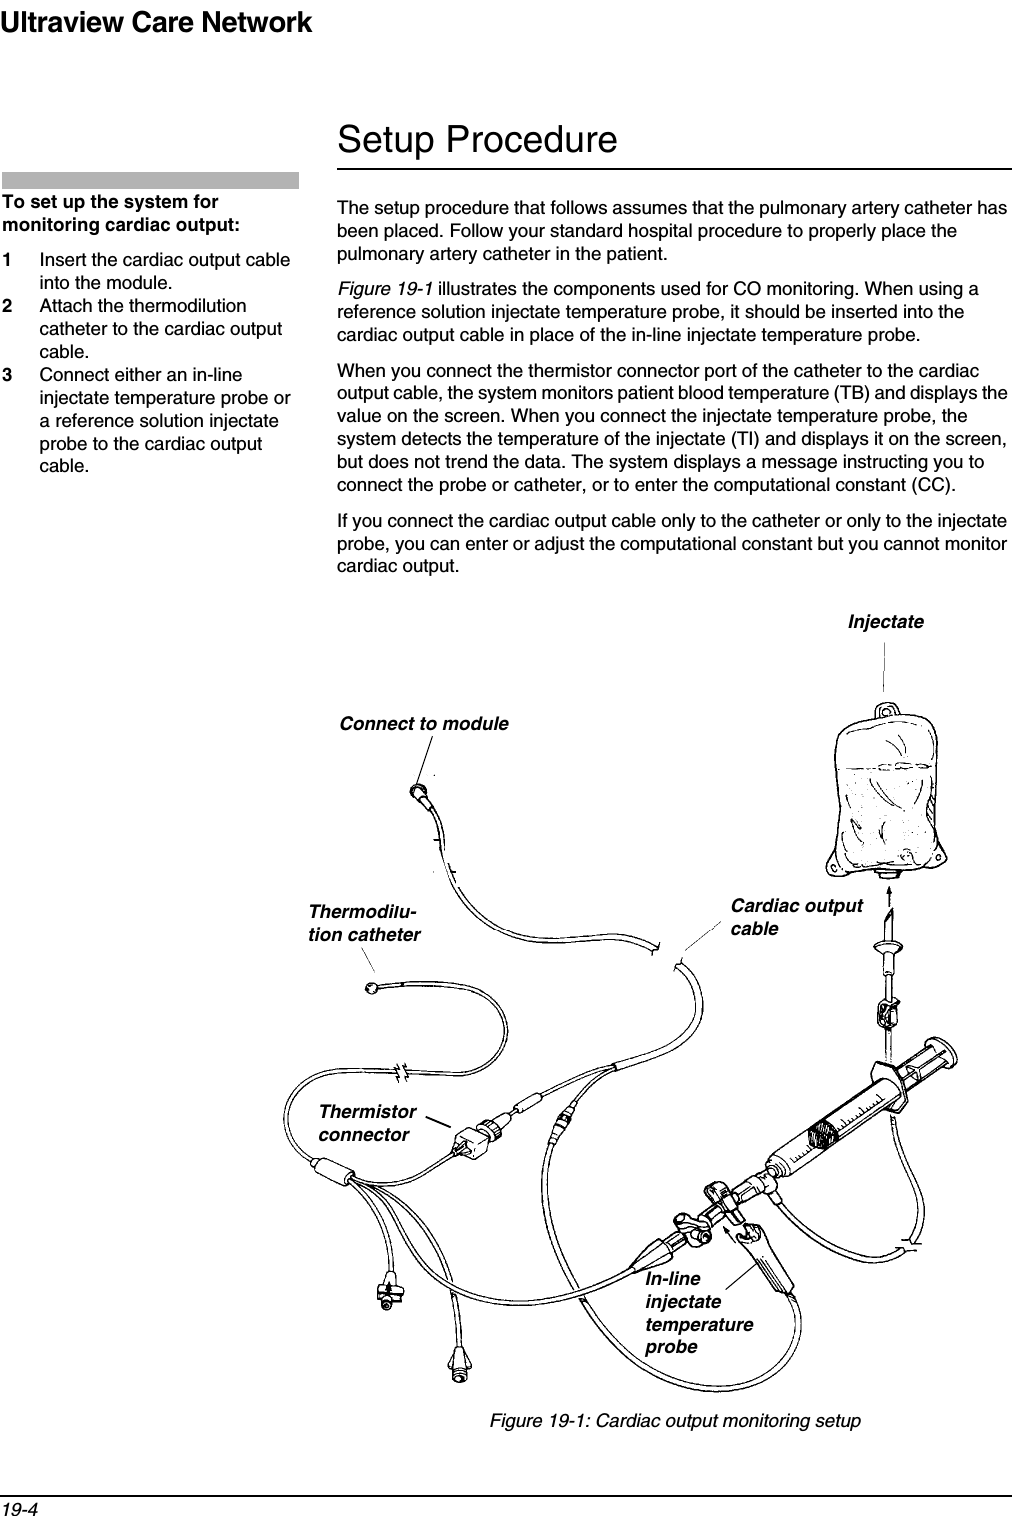 Ultraview Care Network19-4Setup ProcedureThe setup procedure that follows assumes that the pulmonary artery catheter has been placed. Follow your standard hospital procedure to properly place the pulmonary artery catheter in the patient.Figure 19-1 illustrates the components used for CO monitoring. When using a reference solution injectate temperature probe, it should be inserted into the cardiac output cable in place of the in-line injectate temperature probe.When you connect the thermistor connector port of the catheter to the cardiac output cable, the system monitors patient blood temperature (TB) and displays the value on the screen. When you connect the injectate temperature probe, the system detects the temperature of the injectate (TI) and displays it on the screen, but does not trend the data. The system displays a message instructing you to connect the probe or catheter, or to enter the computational constant (CC).If you connect the cardiac output cable only to the catheter or only to the injectate probe, you can enter or adjust the computational constant but you cannot monitor cardiac output.Figure 19-1: Cardiac output monitoring setupTo set up the system for monitoring cardiac output:1Insert the cardiac output cable into the module.2Attach the thermodilution catheter to the cardiac output cable.3Connect either an in-line injectate temperature probe or a reference solution injectate probe to the cardiac output cable.Cardiac outputcableInjectateThermodilu-tion catheterIn-lineinjectate temperature probeThermistorconnectorConnect to module